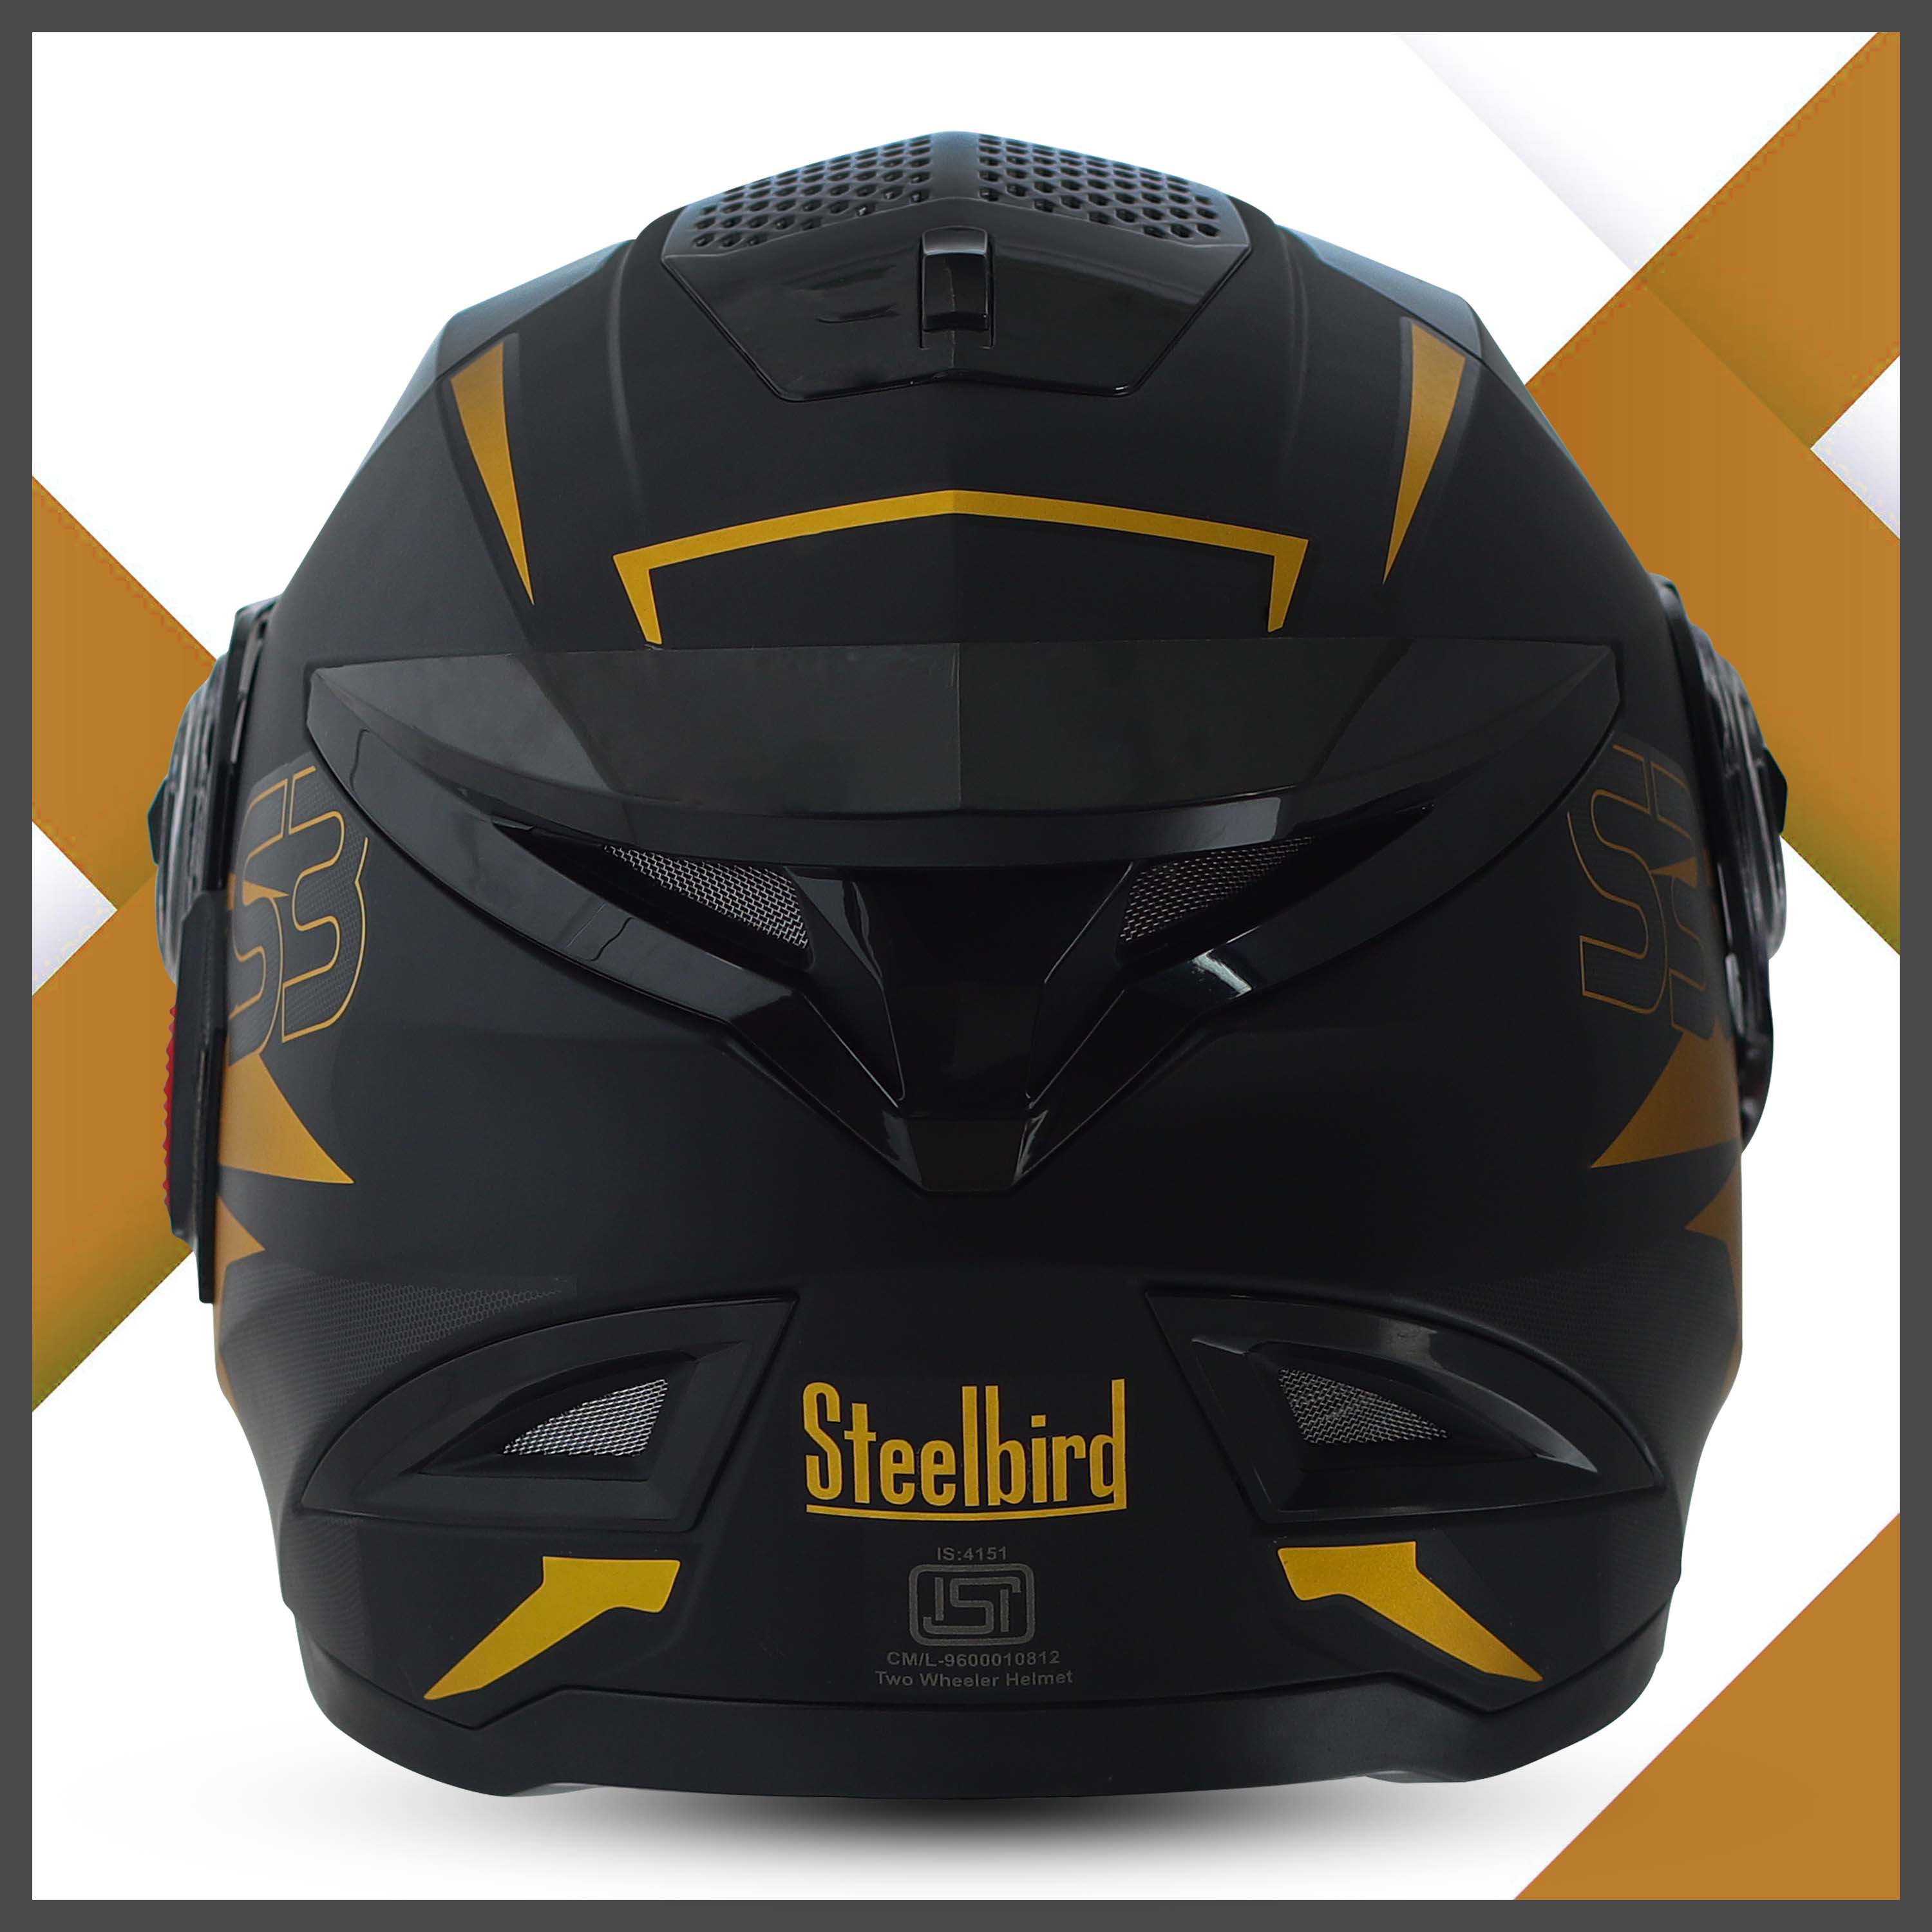 Steelbird SBH-17 Robot Terminator ISI Certified Full Face Chrome Graphic Helmet For Men And Women (Glossy Black Gold With Smoke Visor)